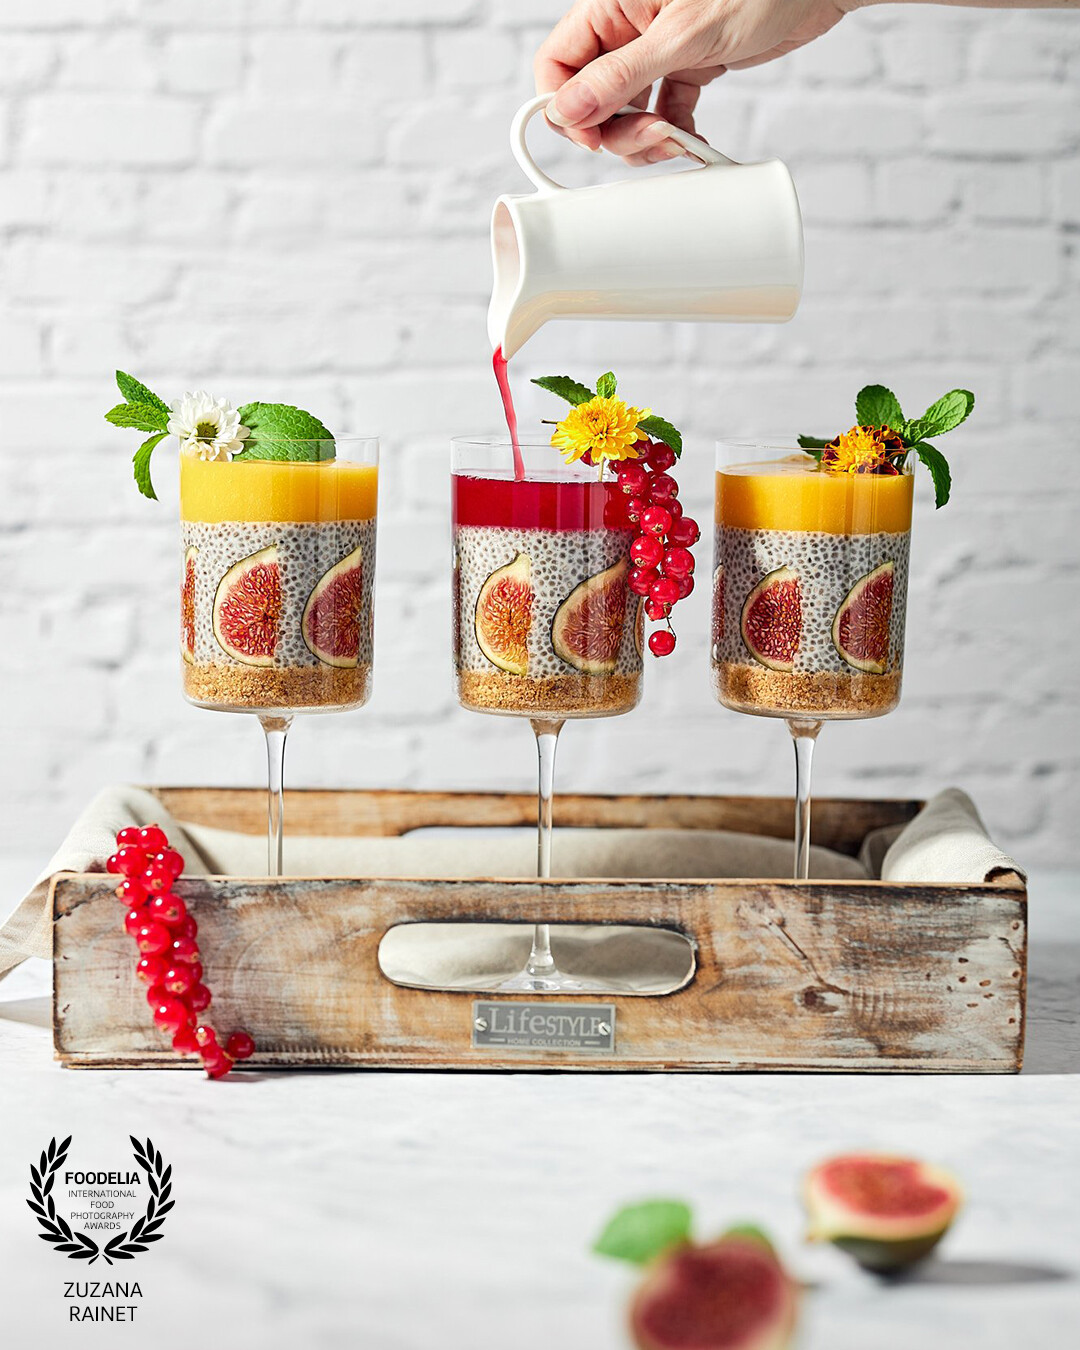 This image represents a modern eye catching styling of a coconut chia pudding with fresh figs and mango puree decorated with eatable flowers. <br />
<br />
I wanted the image to be minimalistic as the dessert itself is busy and colourful. The frozen movement of pouring liquid adds an interest to the whole frame while the light and airy style makes the dessert to stand out. Shot with studio flash light.